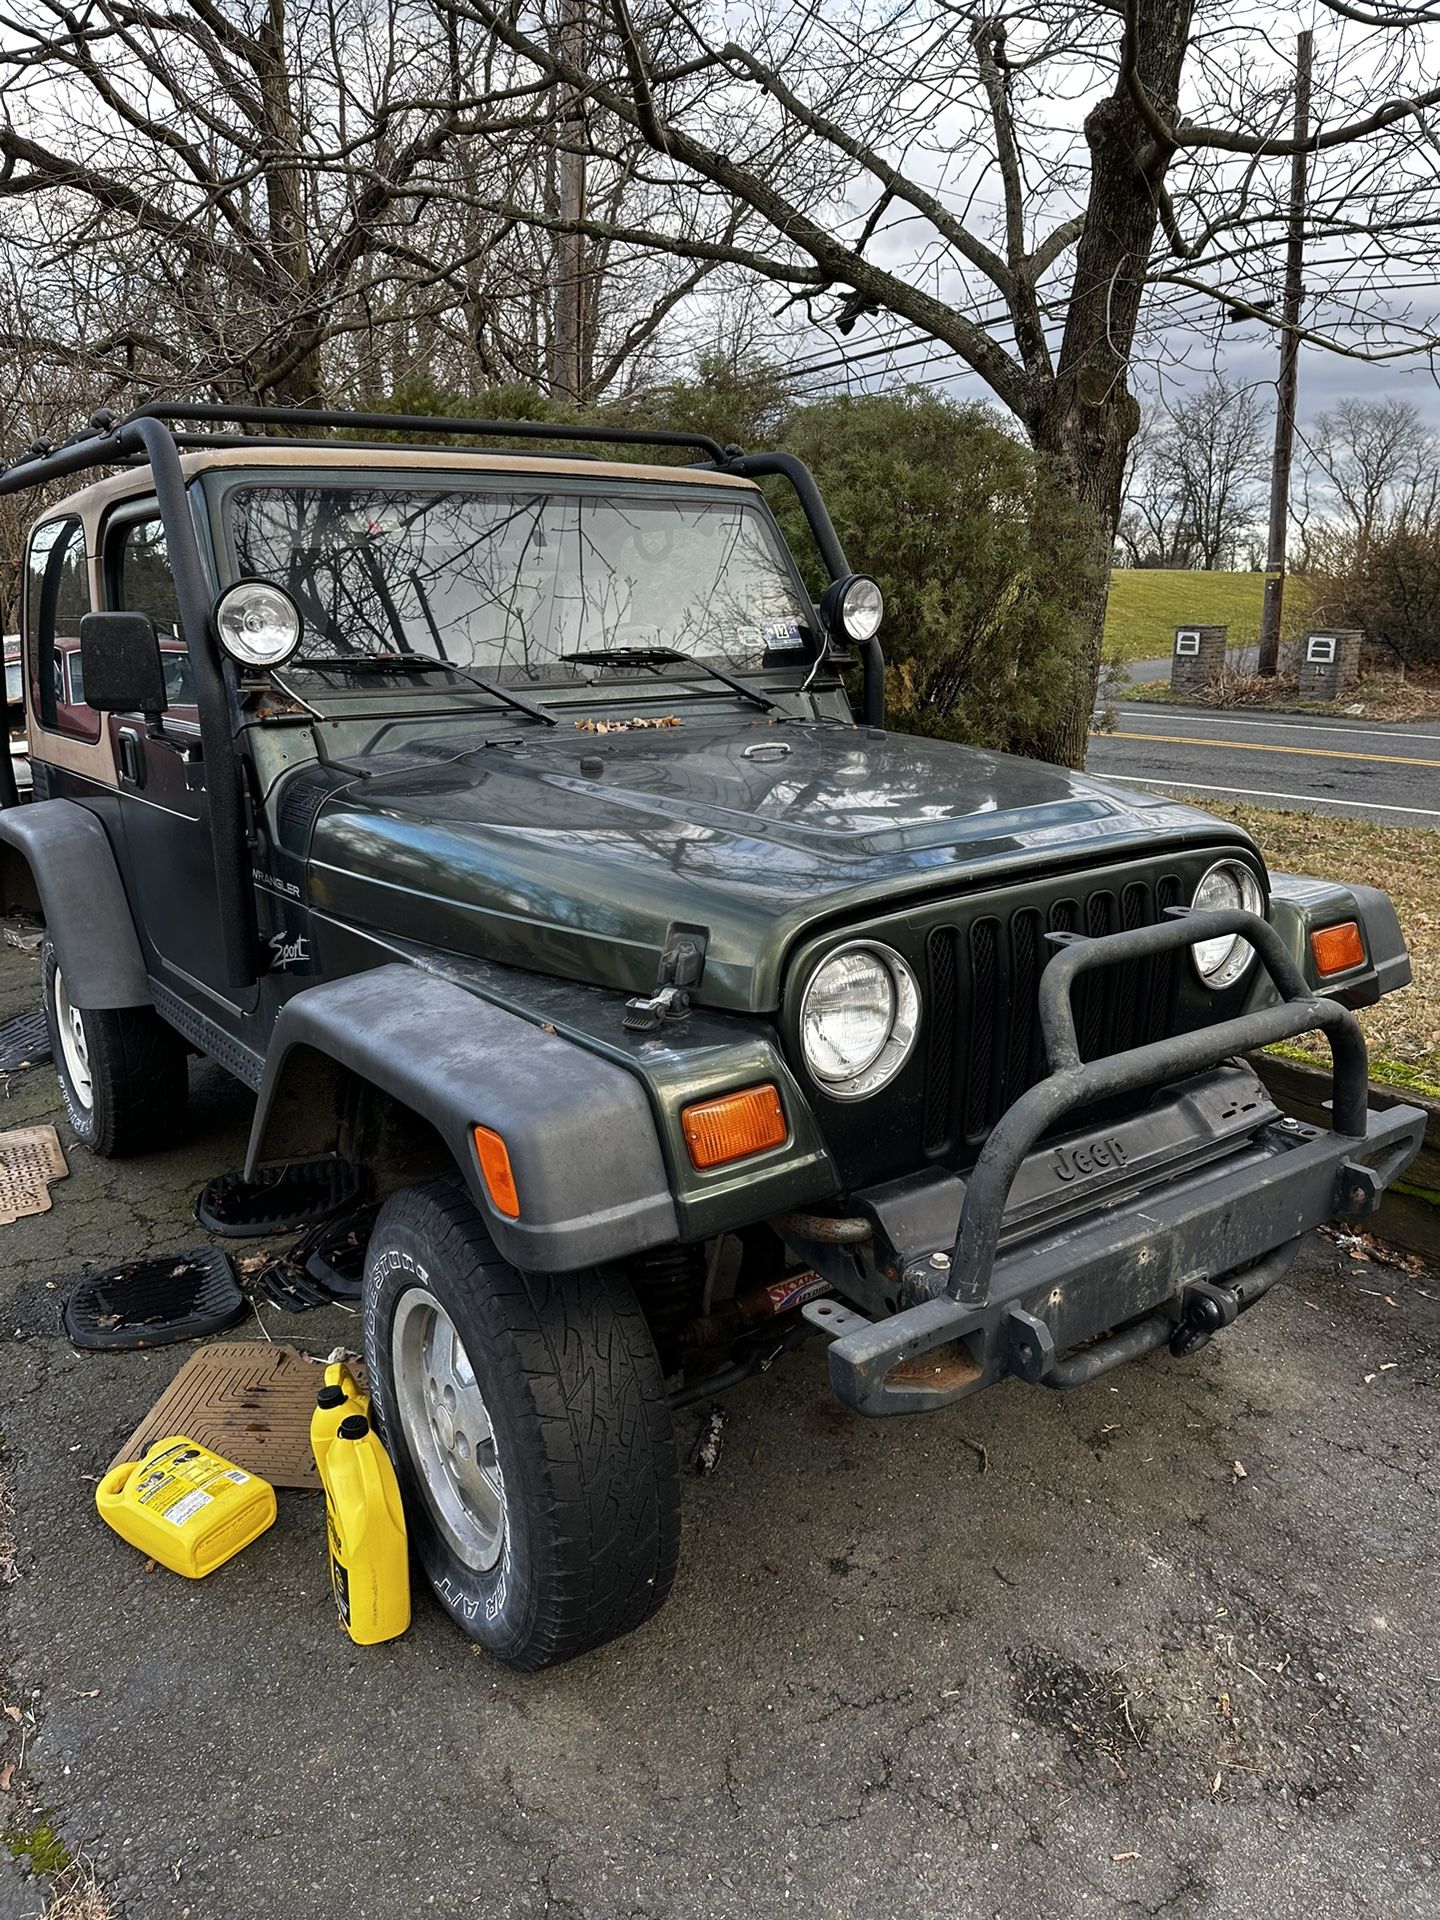 1998 Jeep Wrangler for Sale in Wrightstown, NJ - OfferUp